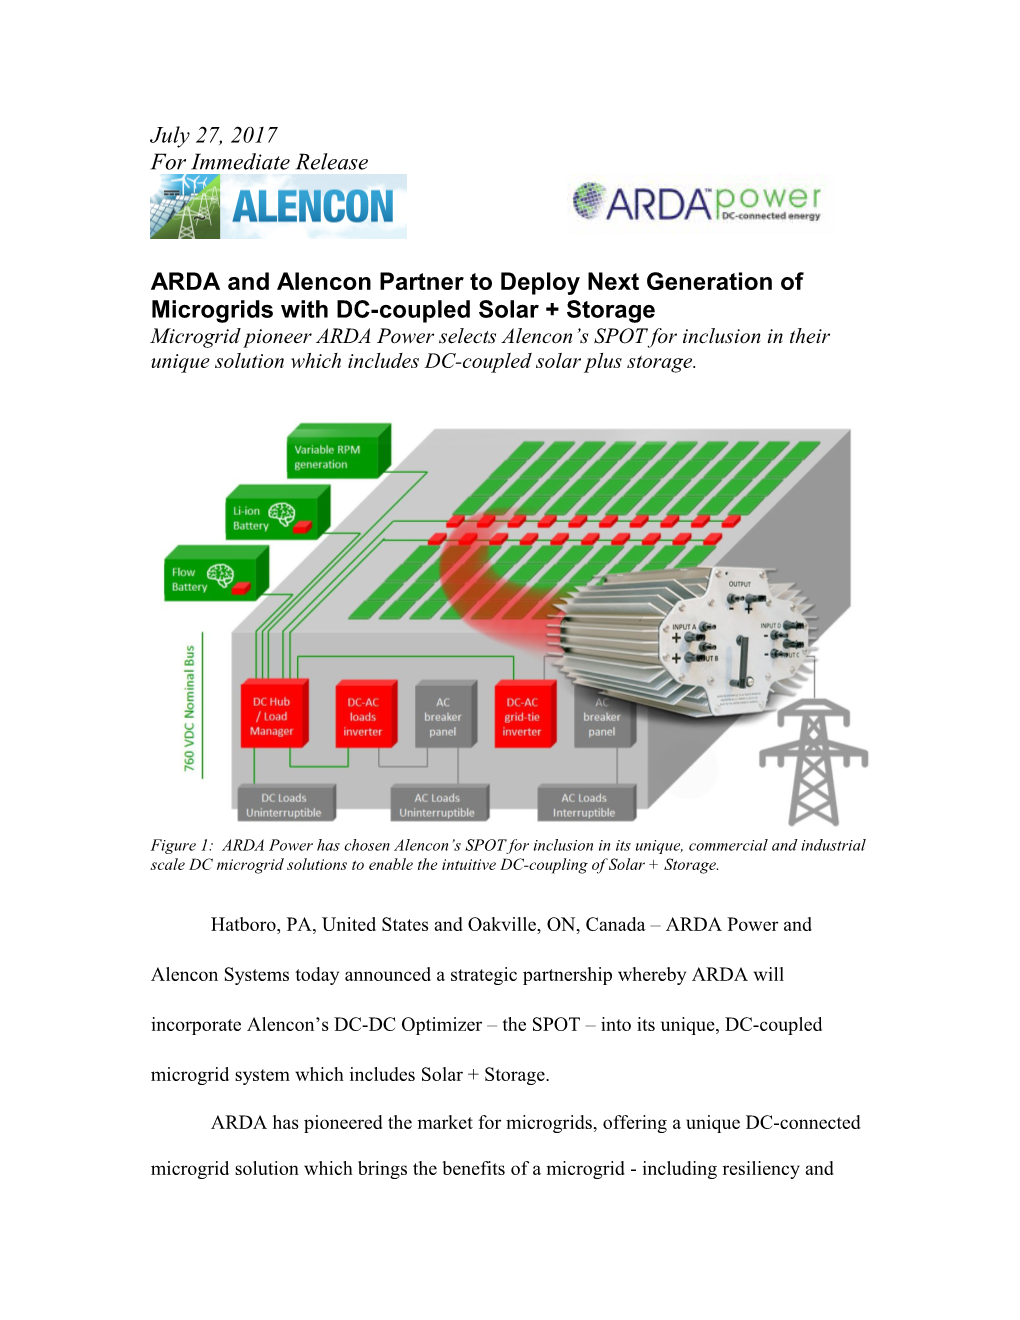 ARDA and Alencon Partner to Deploy Next Generation of Microgrids with DC-Coupled Solar